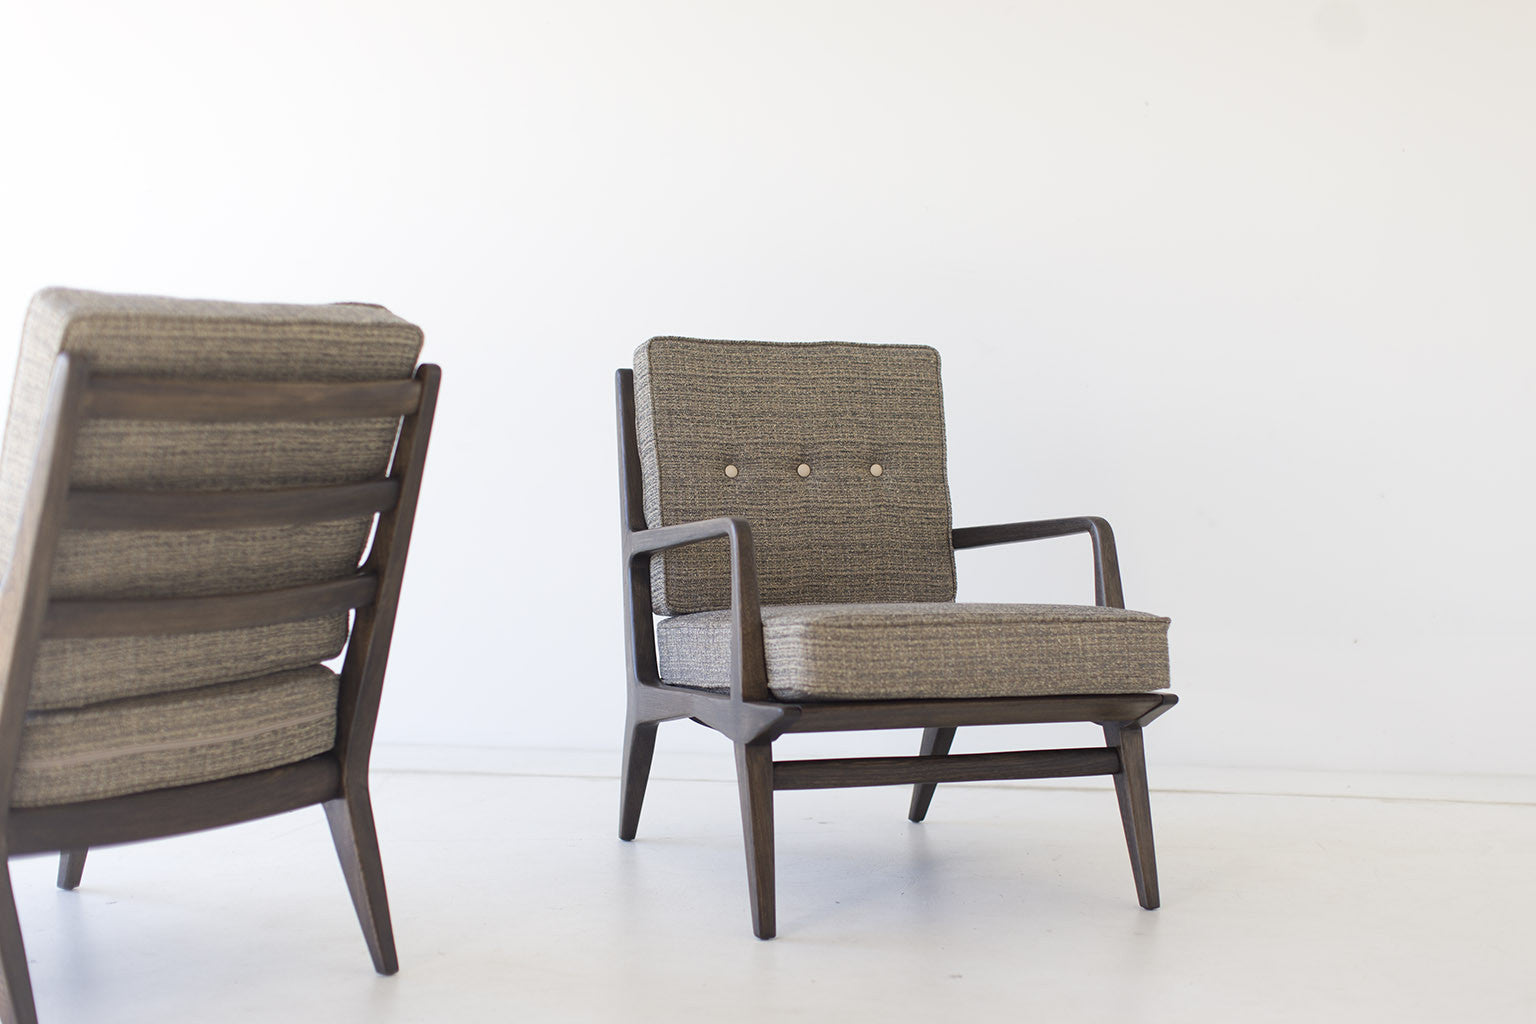 Carlo De Carli Lounge Chairs for M. Singer & Sons - 01181602